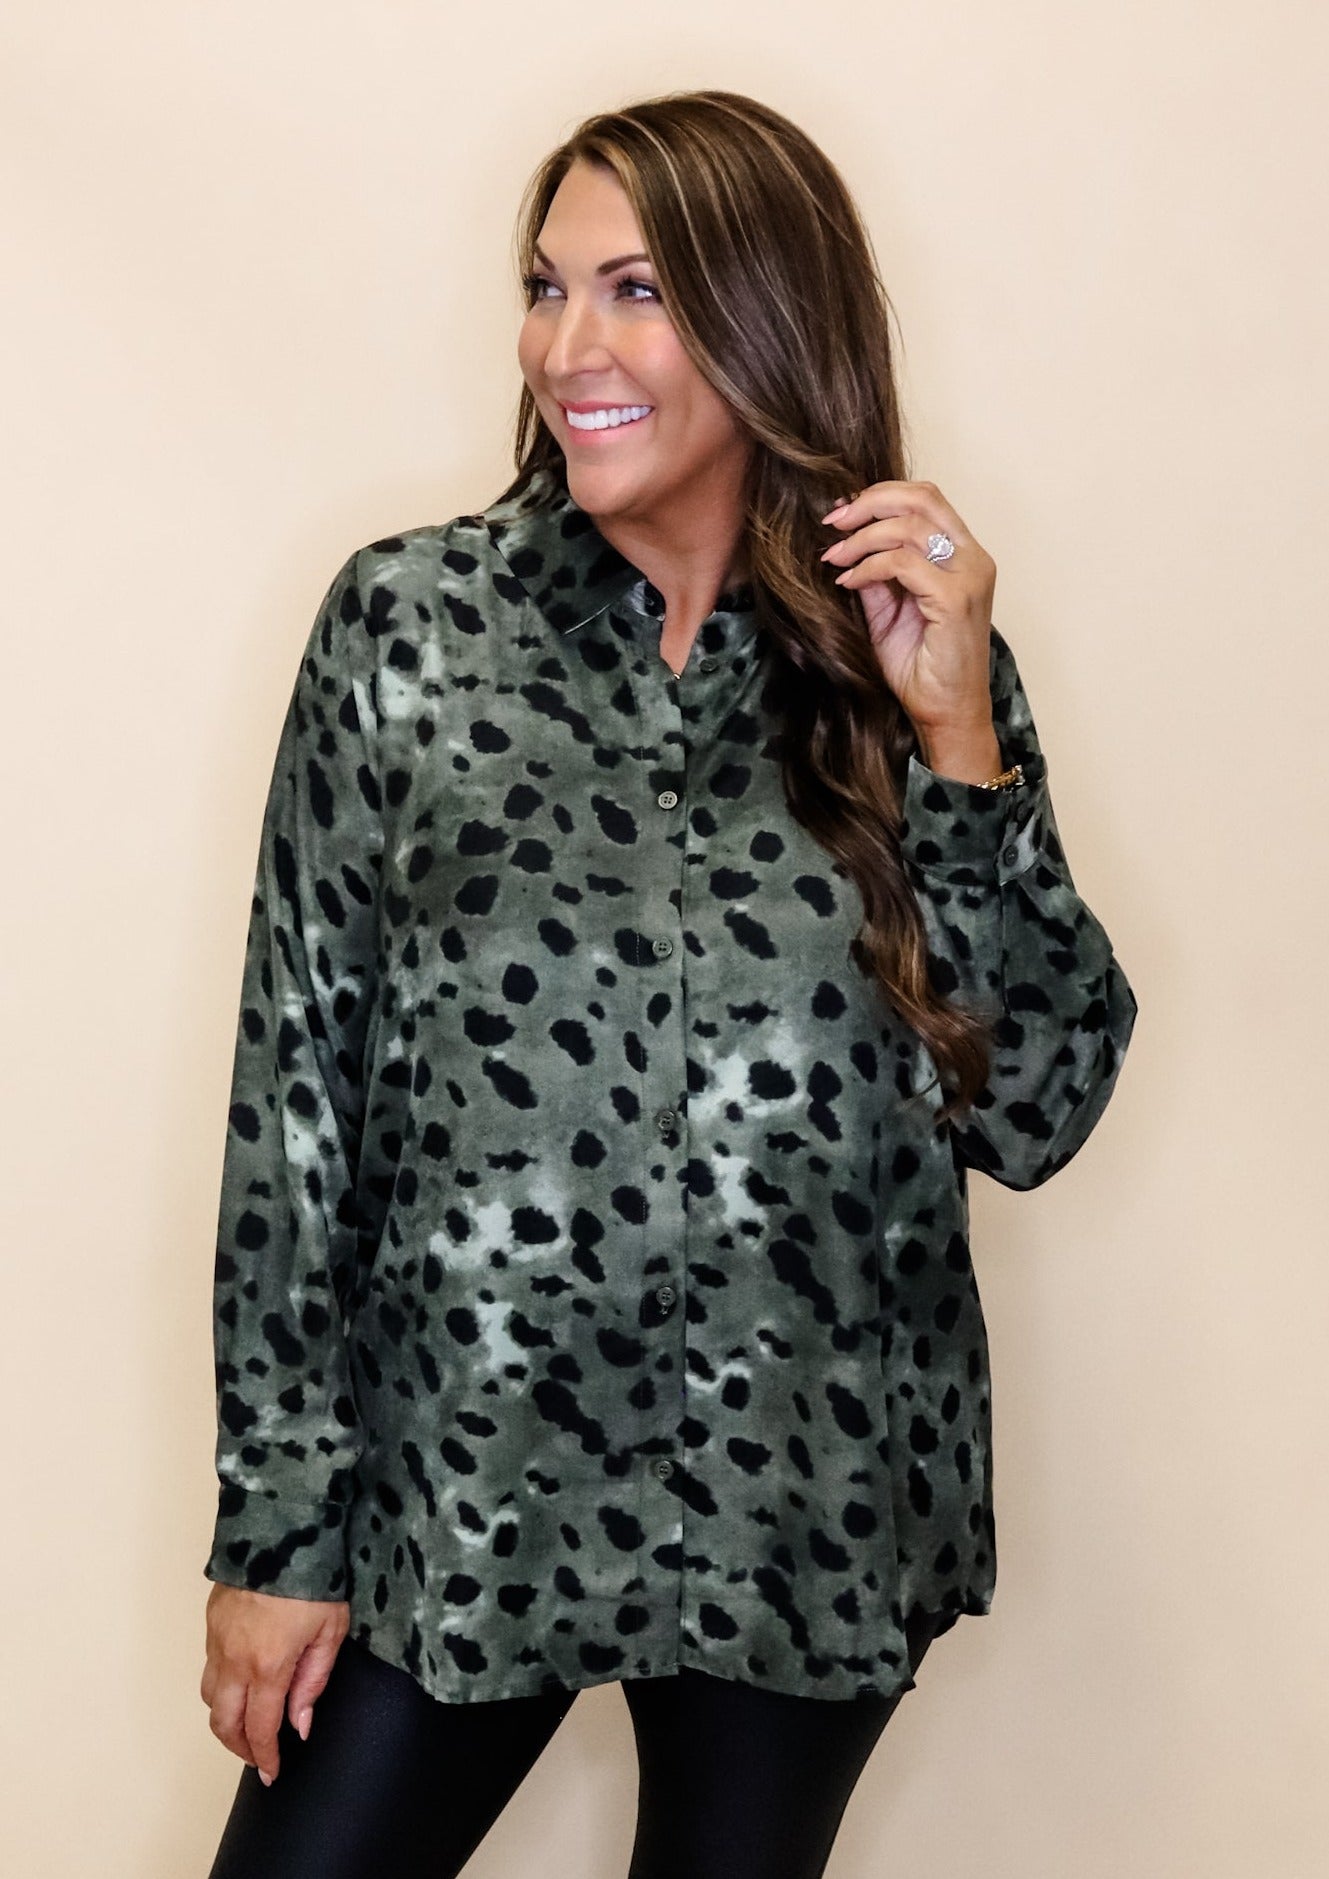 Moss Leopard Print Collared Neck Top